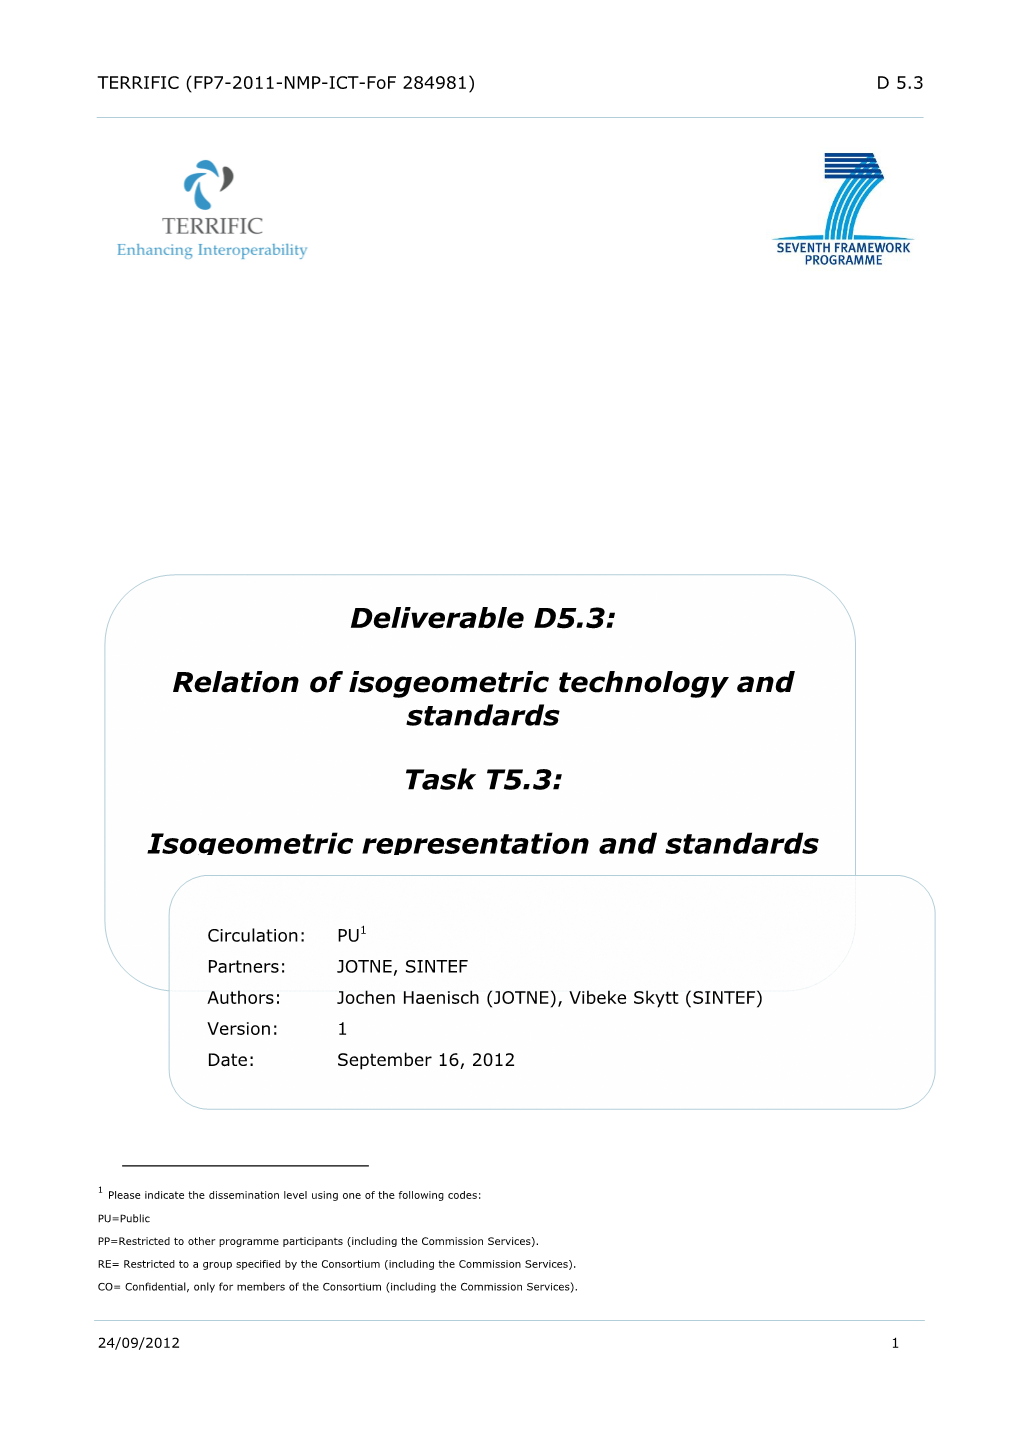 Deliverable D5.3: Relation of Isogeometric Technology And